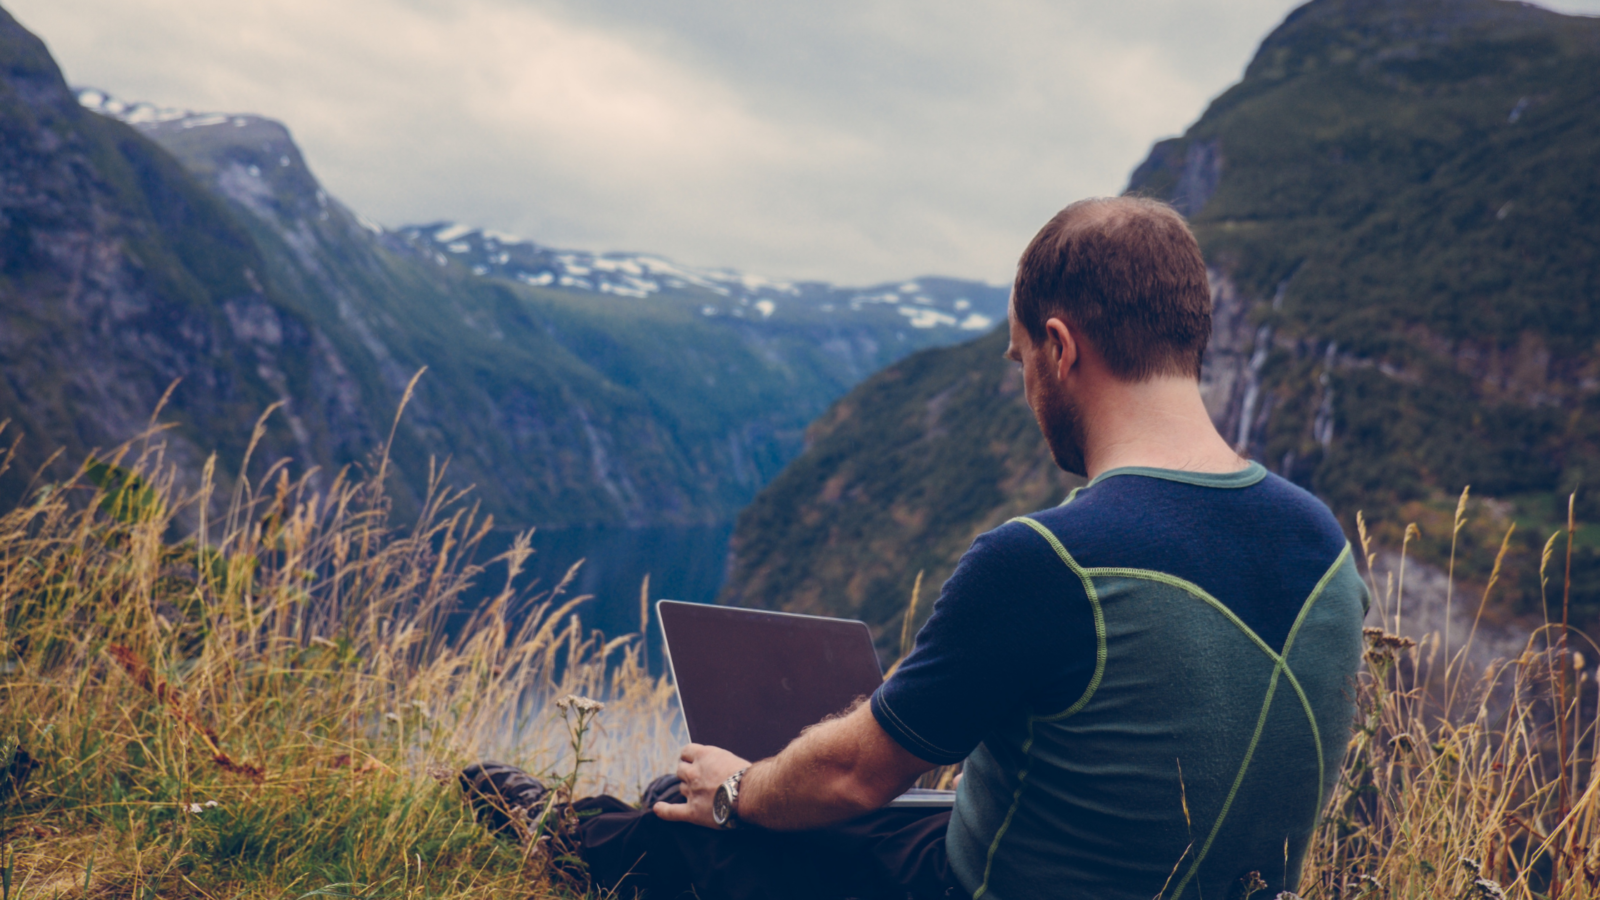 A guy working remotely in nature